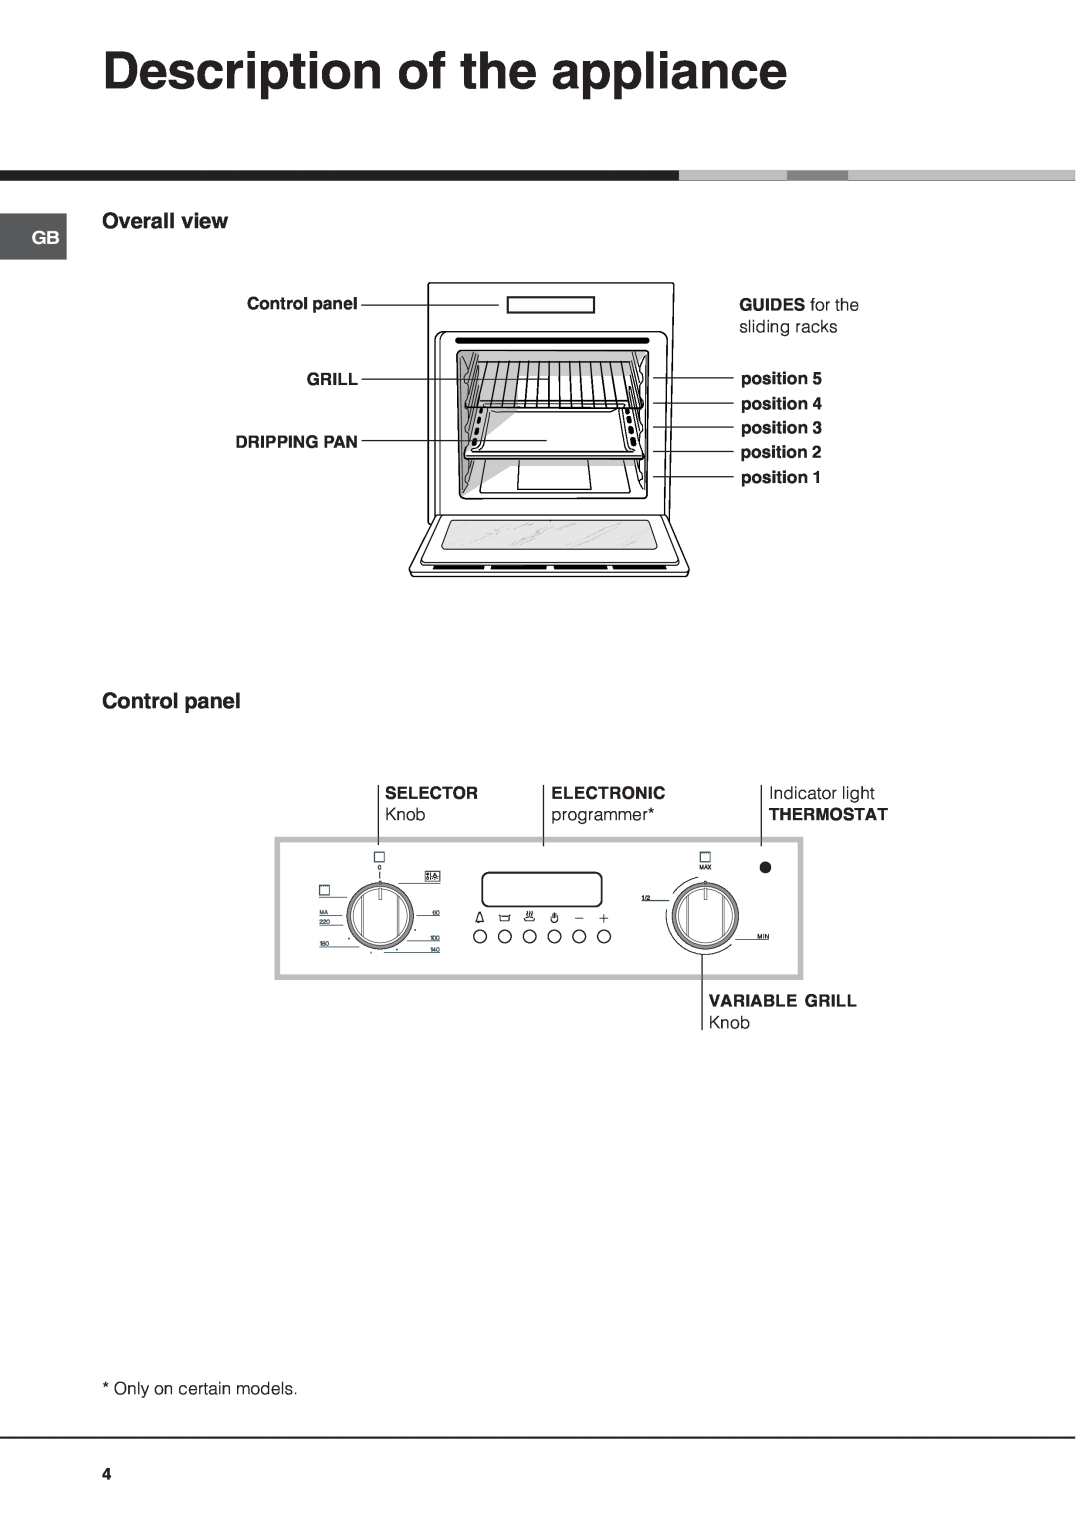 Hotpoint SY36B, SY37K Description of the appliance, Control panel GRILL DRIPPING PAN, GUIDES for the, 220, 100, Max Min 